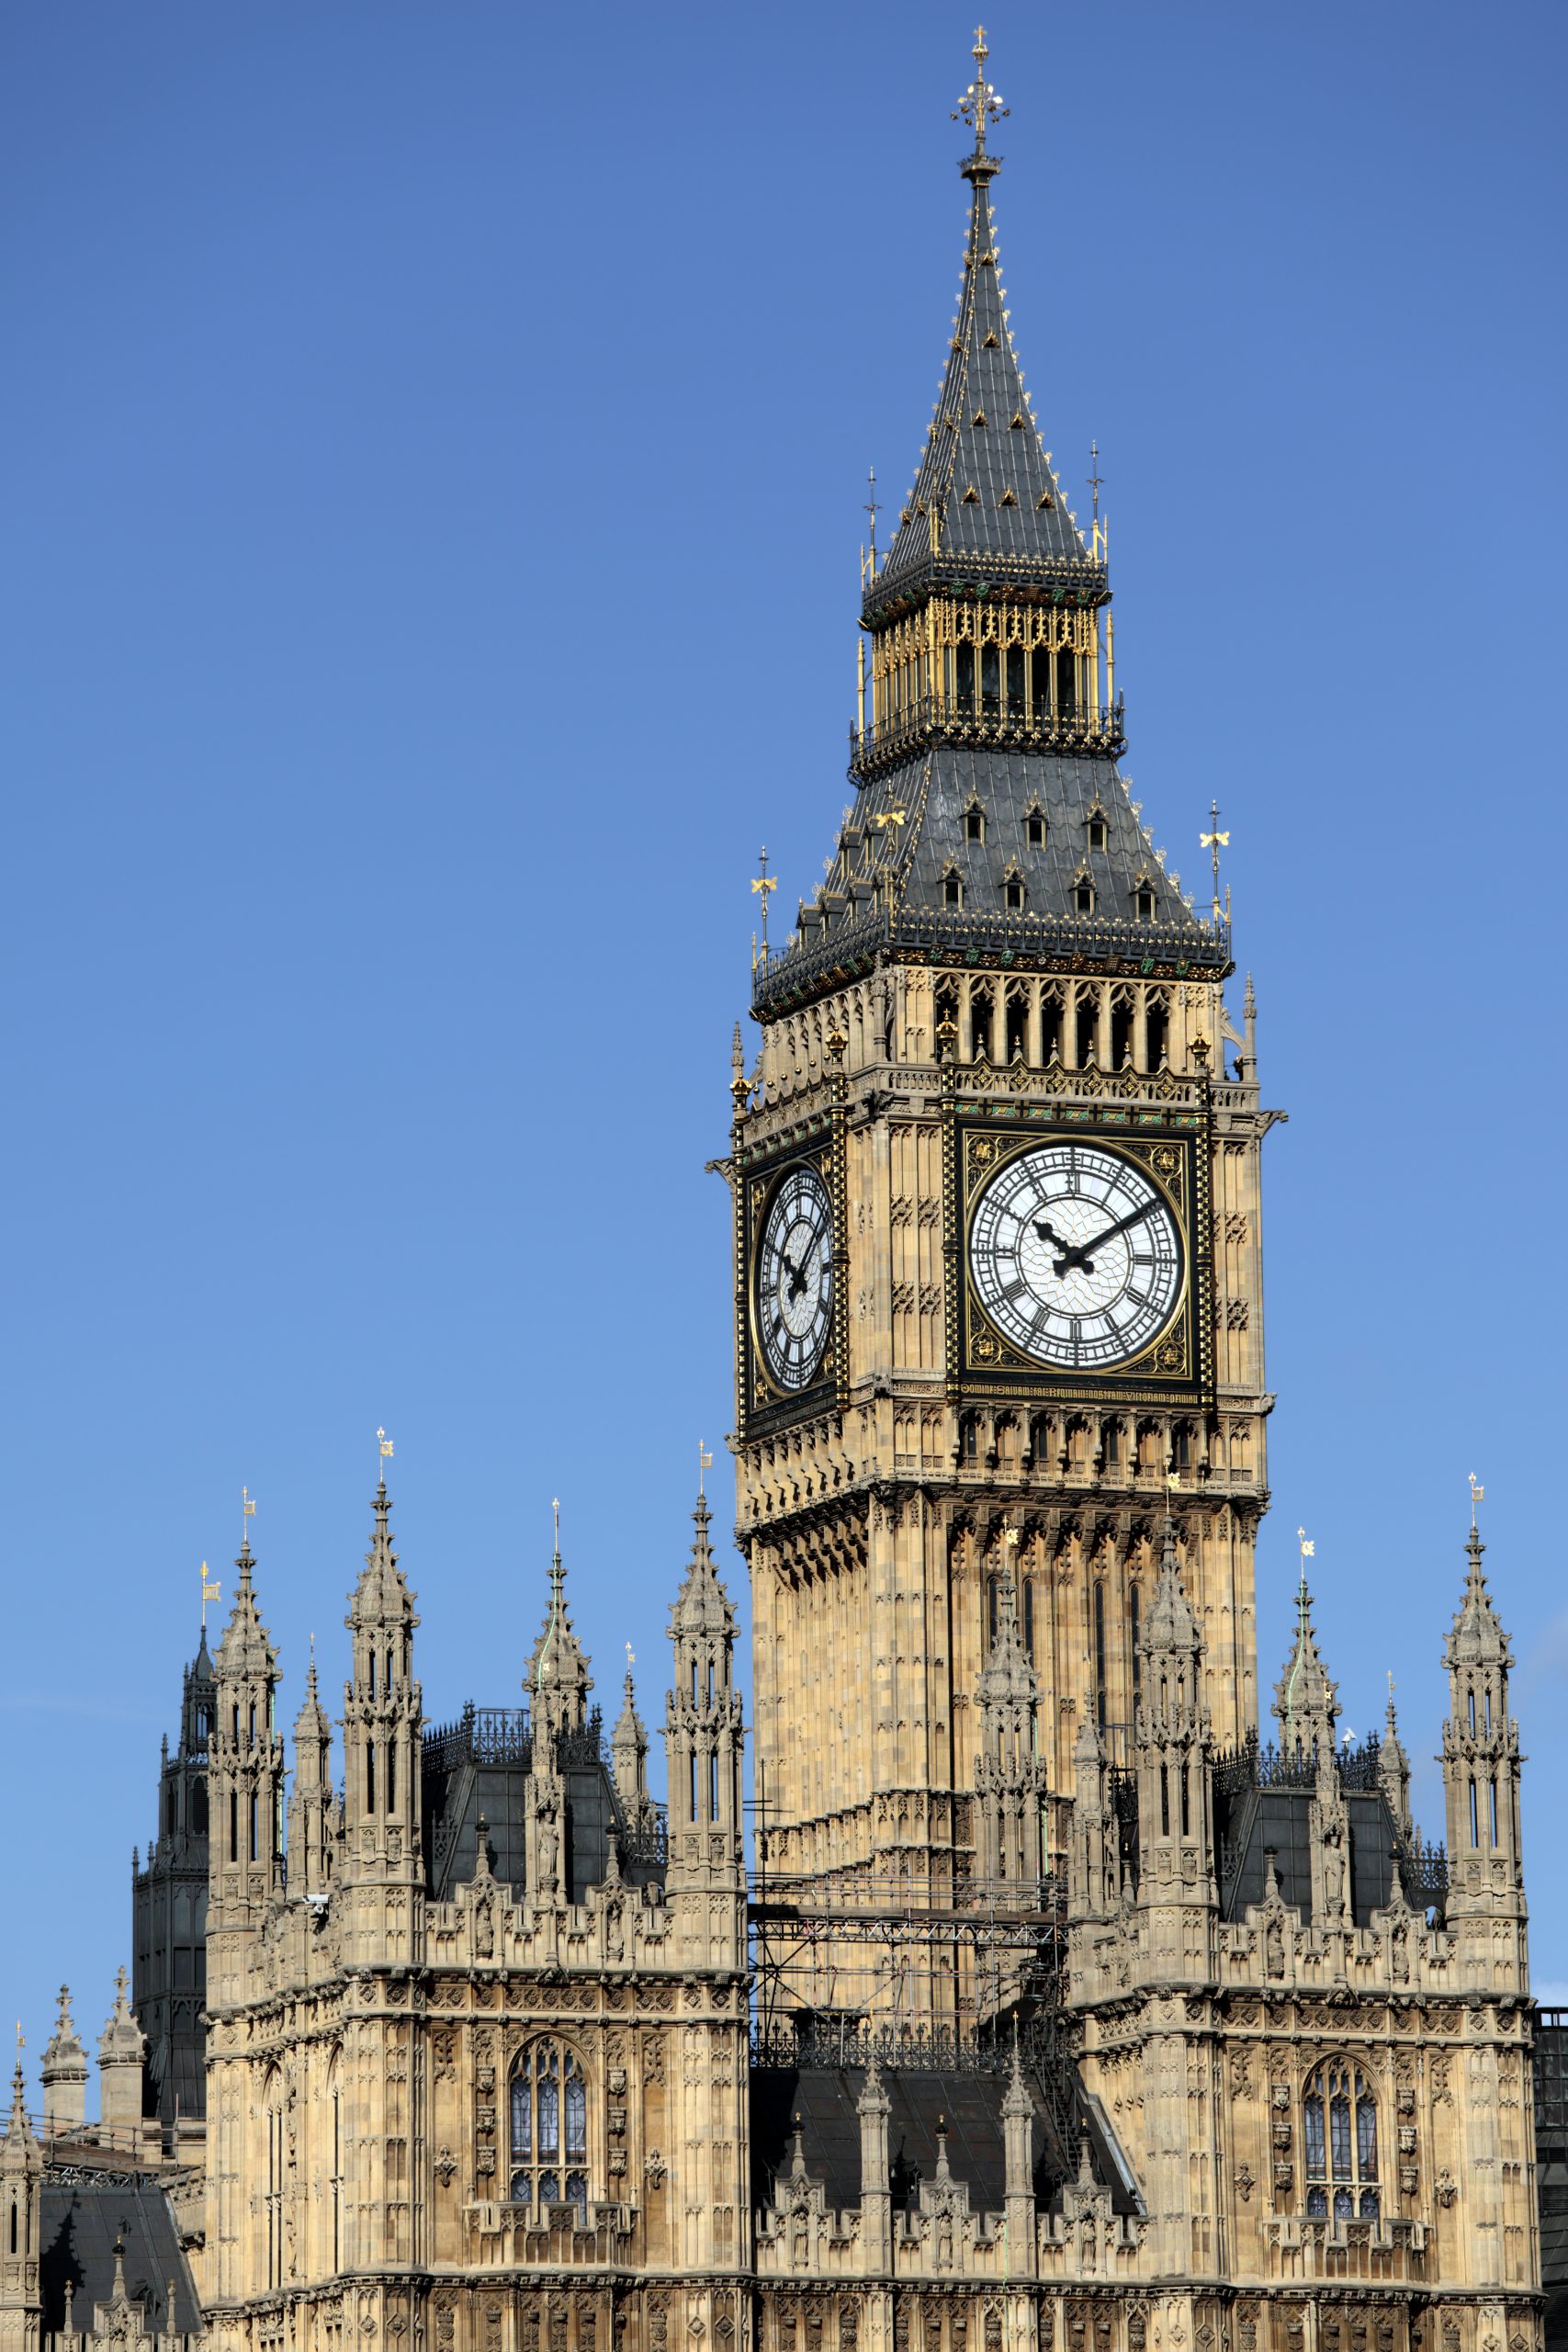 UK Houses of Parliament with Big Ben clock tower.